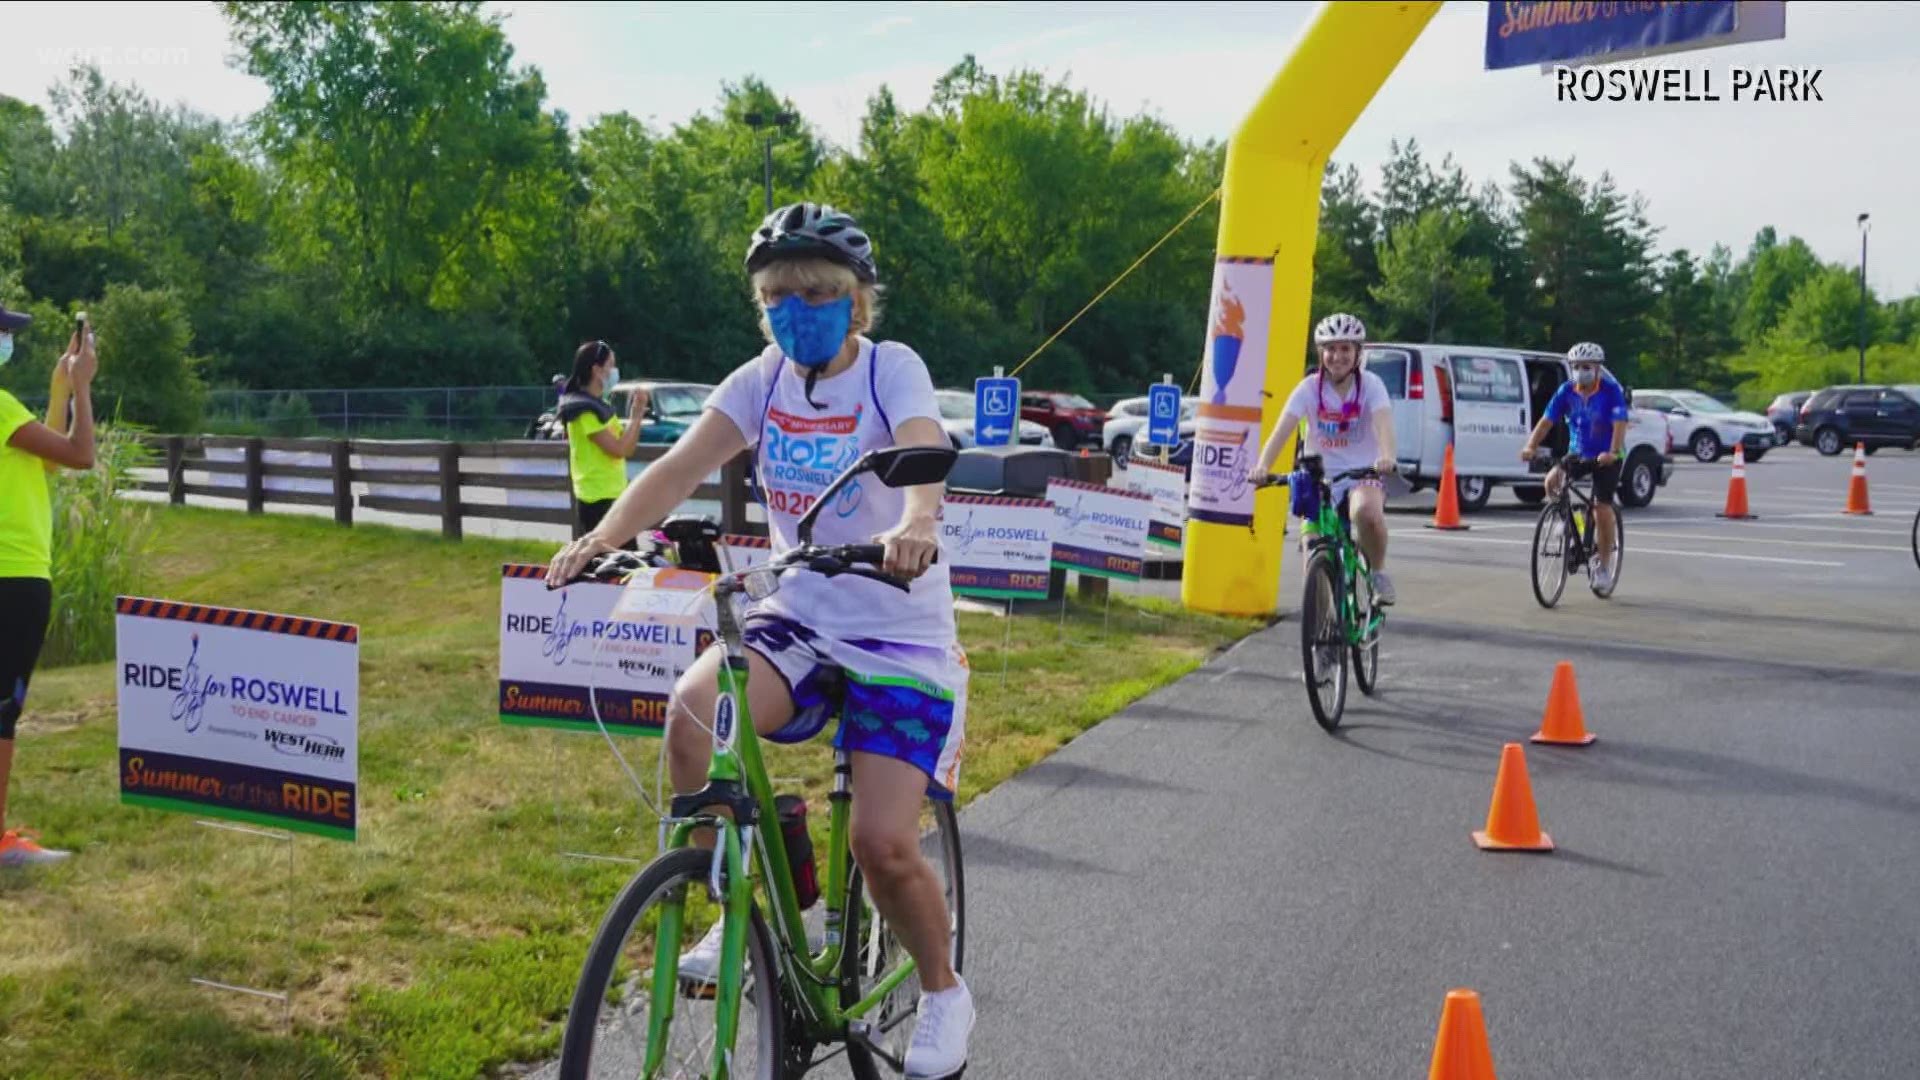 Lori Runk of Lockport challenged herself to hit a major milestone in re-imagined Ride for Roswell event